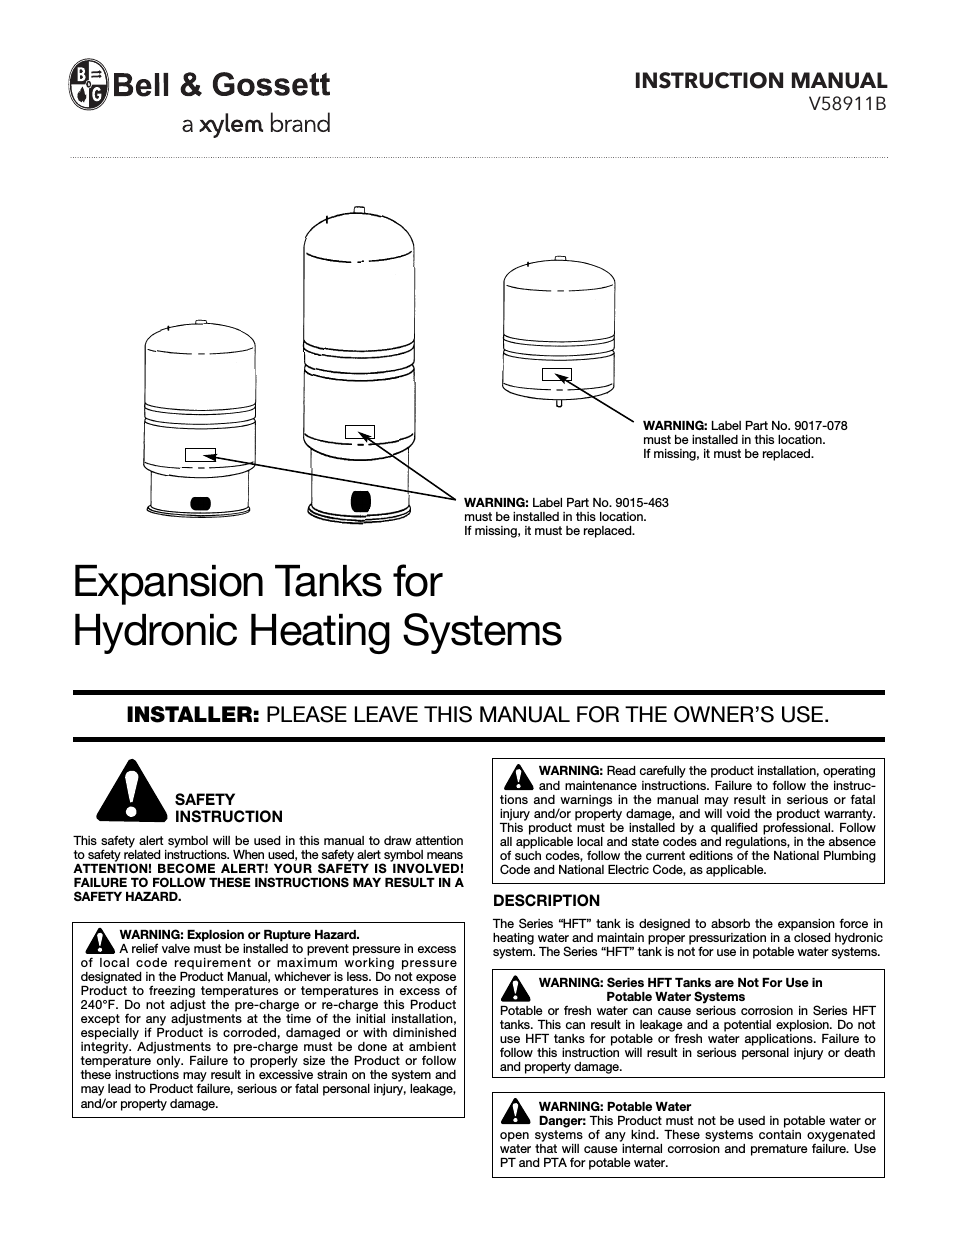 V58911B Expansion Tanks for Hydronic Heating Systems